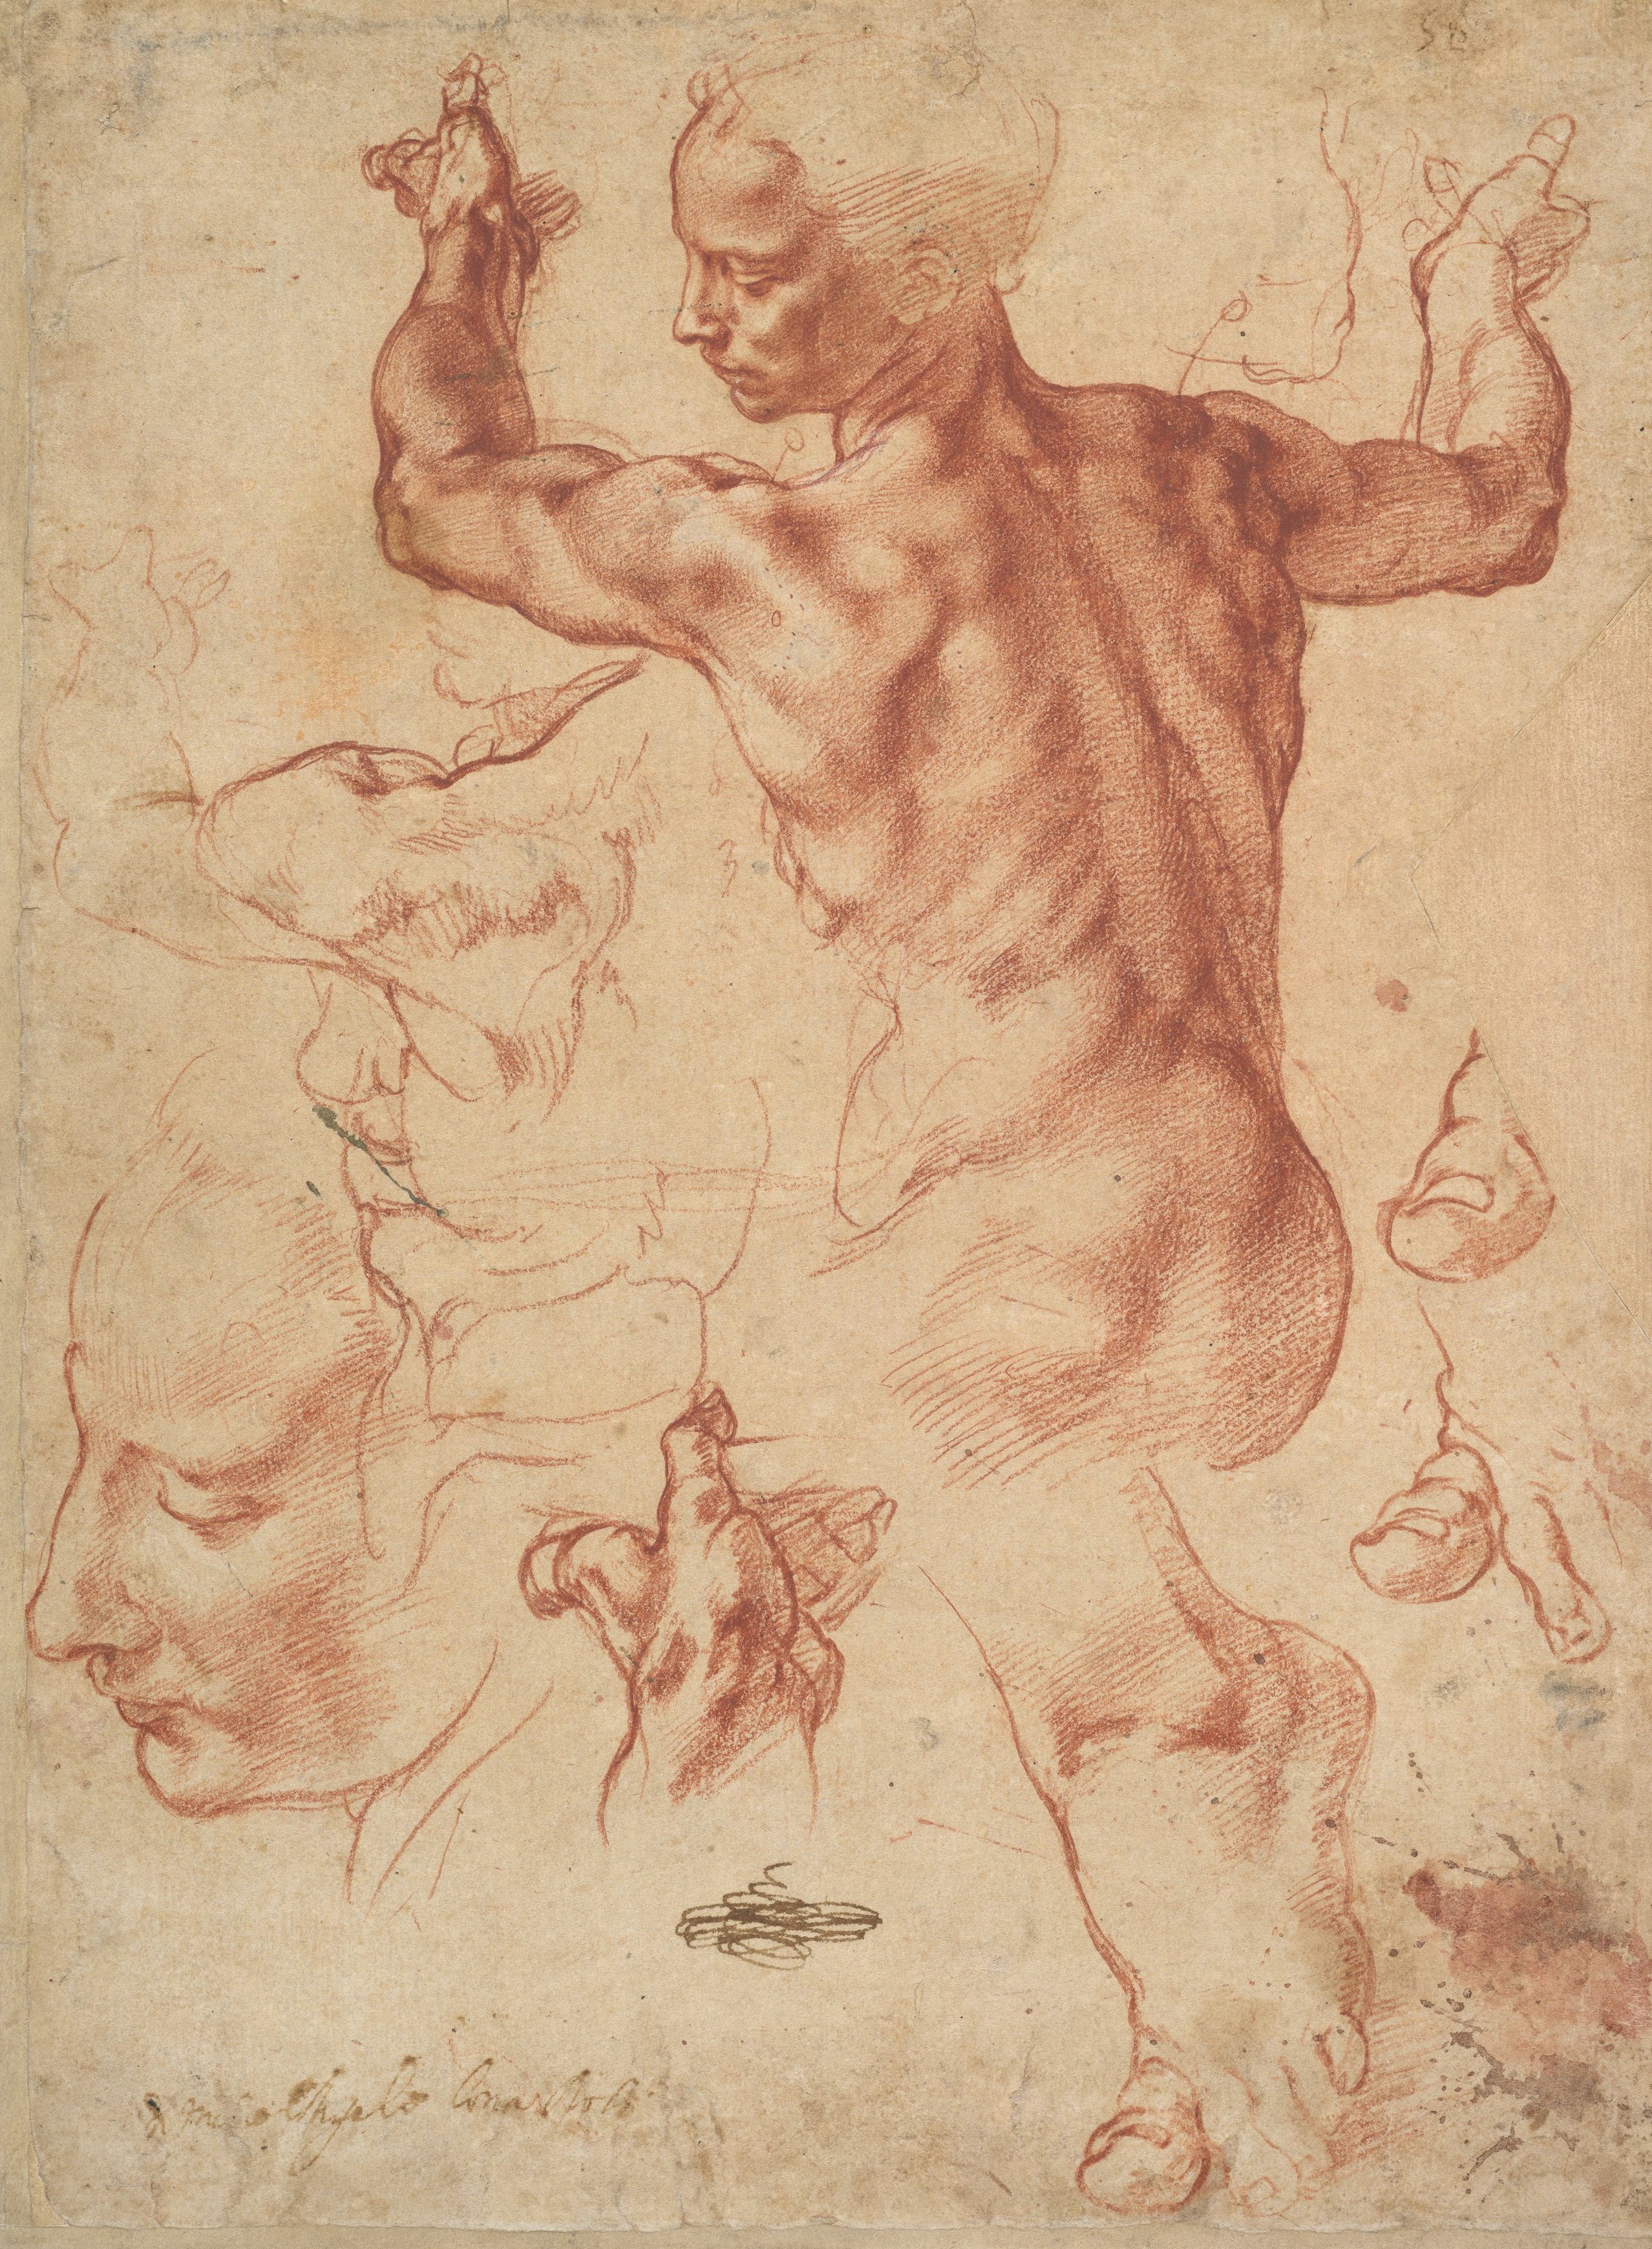 Studies for the Libyan Sibyl, between 1510-1511 by Michelangelo. Red chalk, white chalk and charcoal on paper; 11 3/8 inches by 8 7/16 inches. Metropolitan Museum of Art, New York City. 